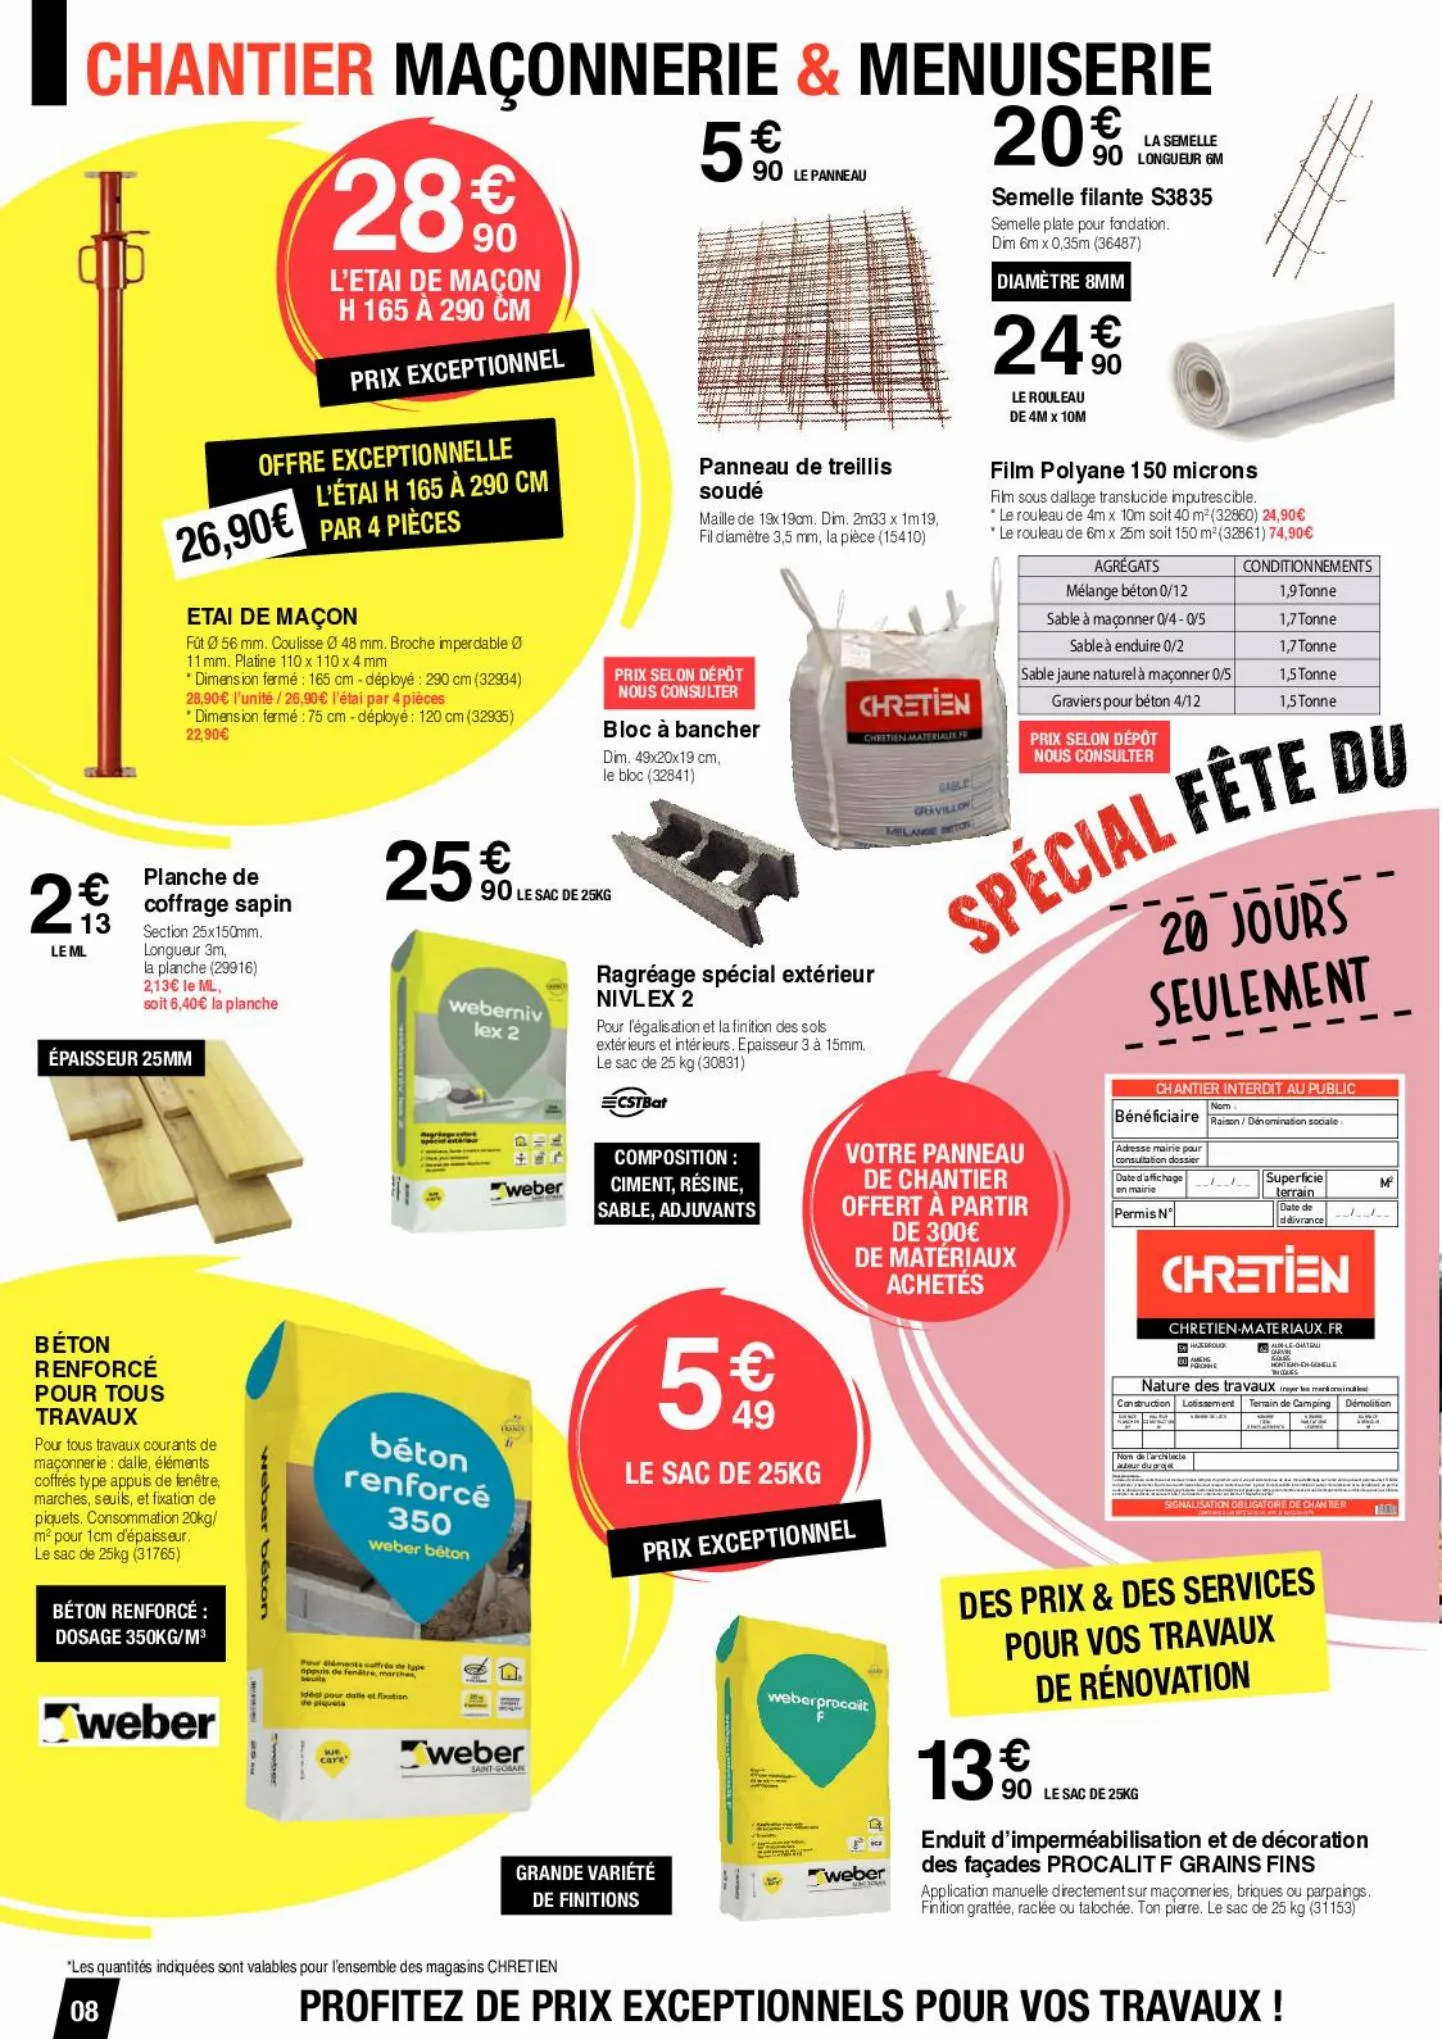 Catalogue Promo Avril 2023 Chretien, page 00008